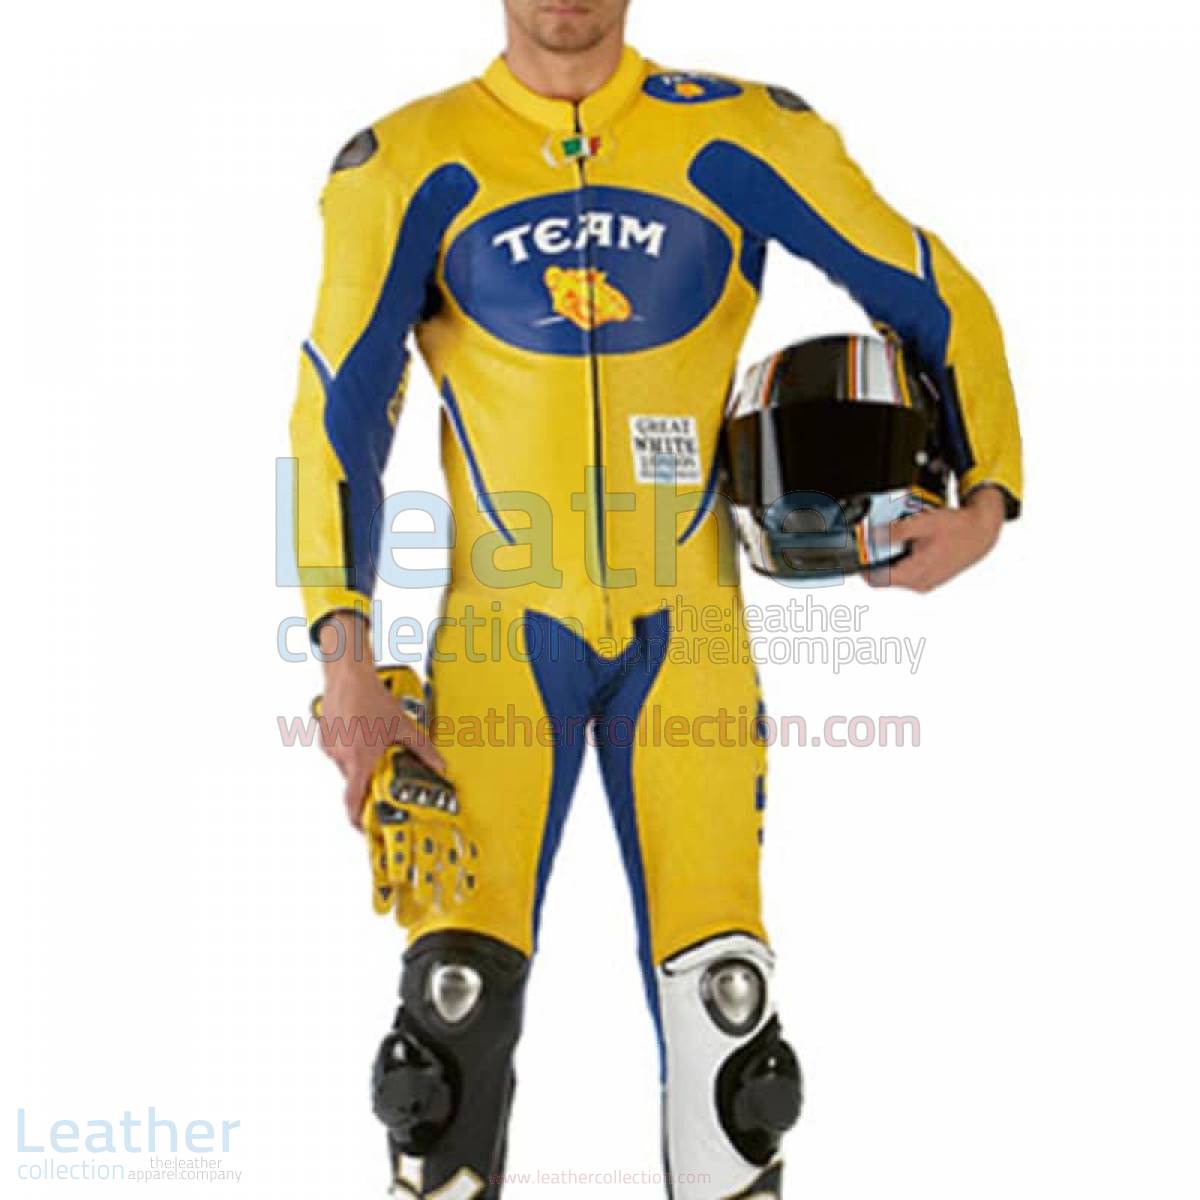 VR46 Team Motorcycle Racing Leather Suit